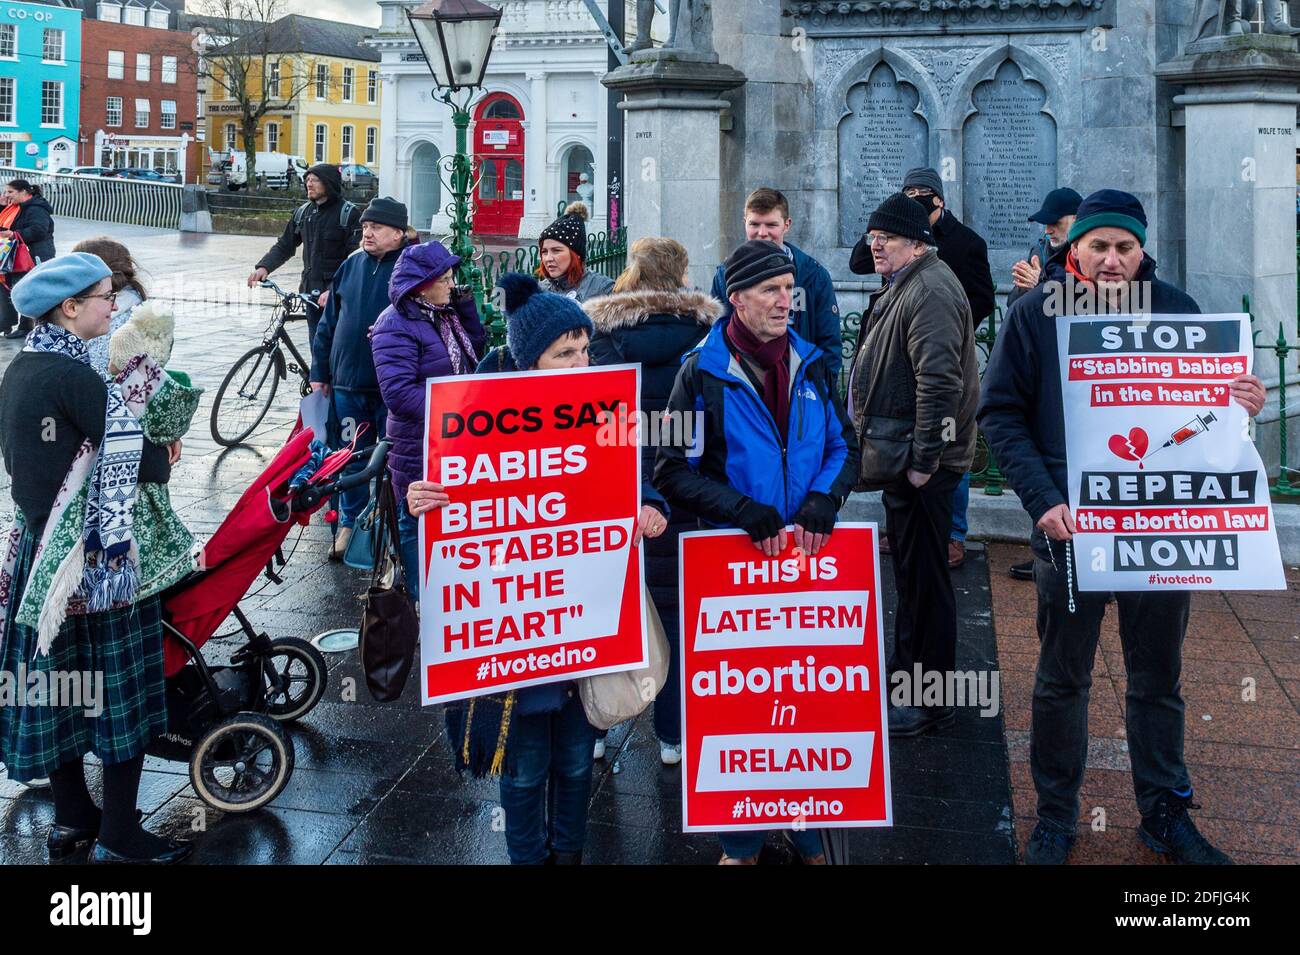 Cork, Ireland. 5th Dec, 2020. Members of the Life Institute were out in force in Cork today, protesting against late term abortions. The group claims babies which are late term aborted sometimes survive outside the womb and doctors have to perform feticide on the infants. Credit: AG News/Alamy Live News Stock Photo